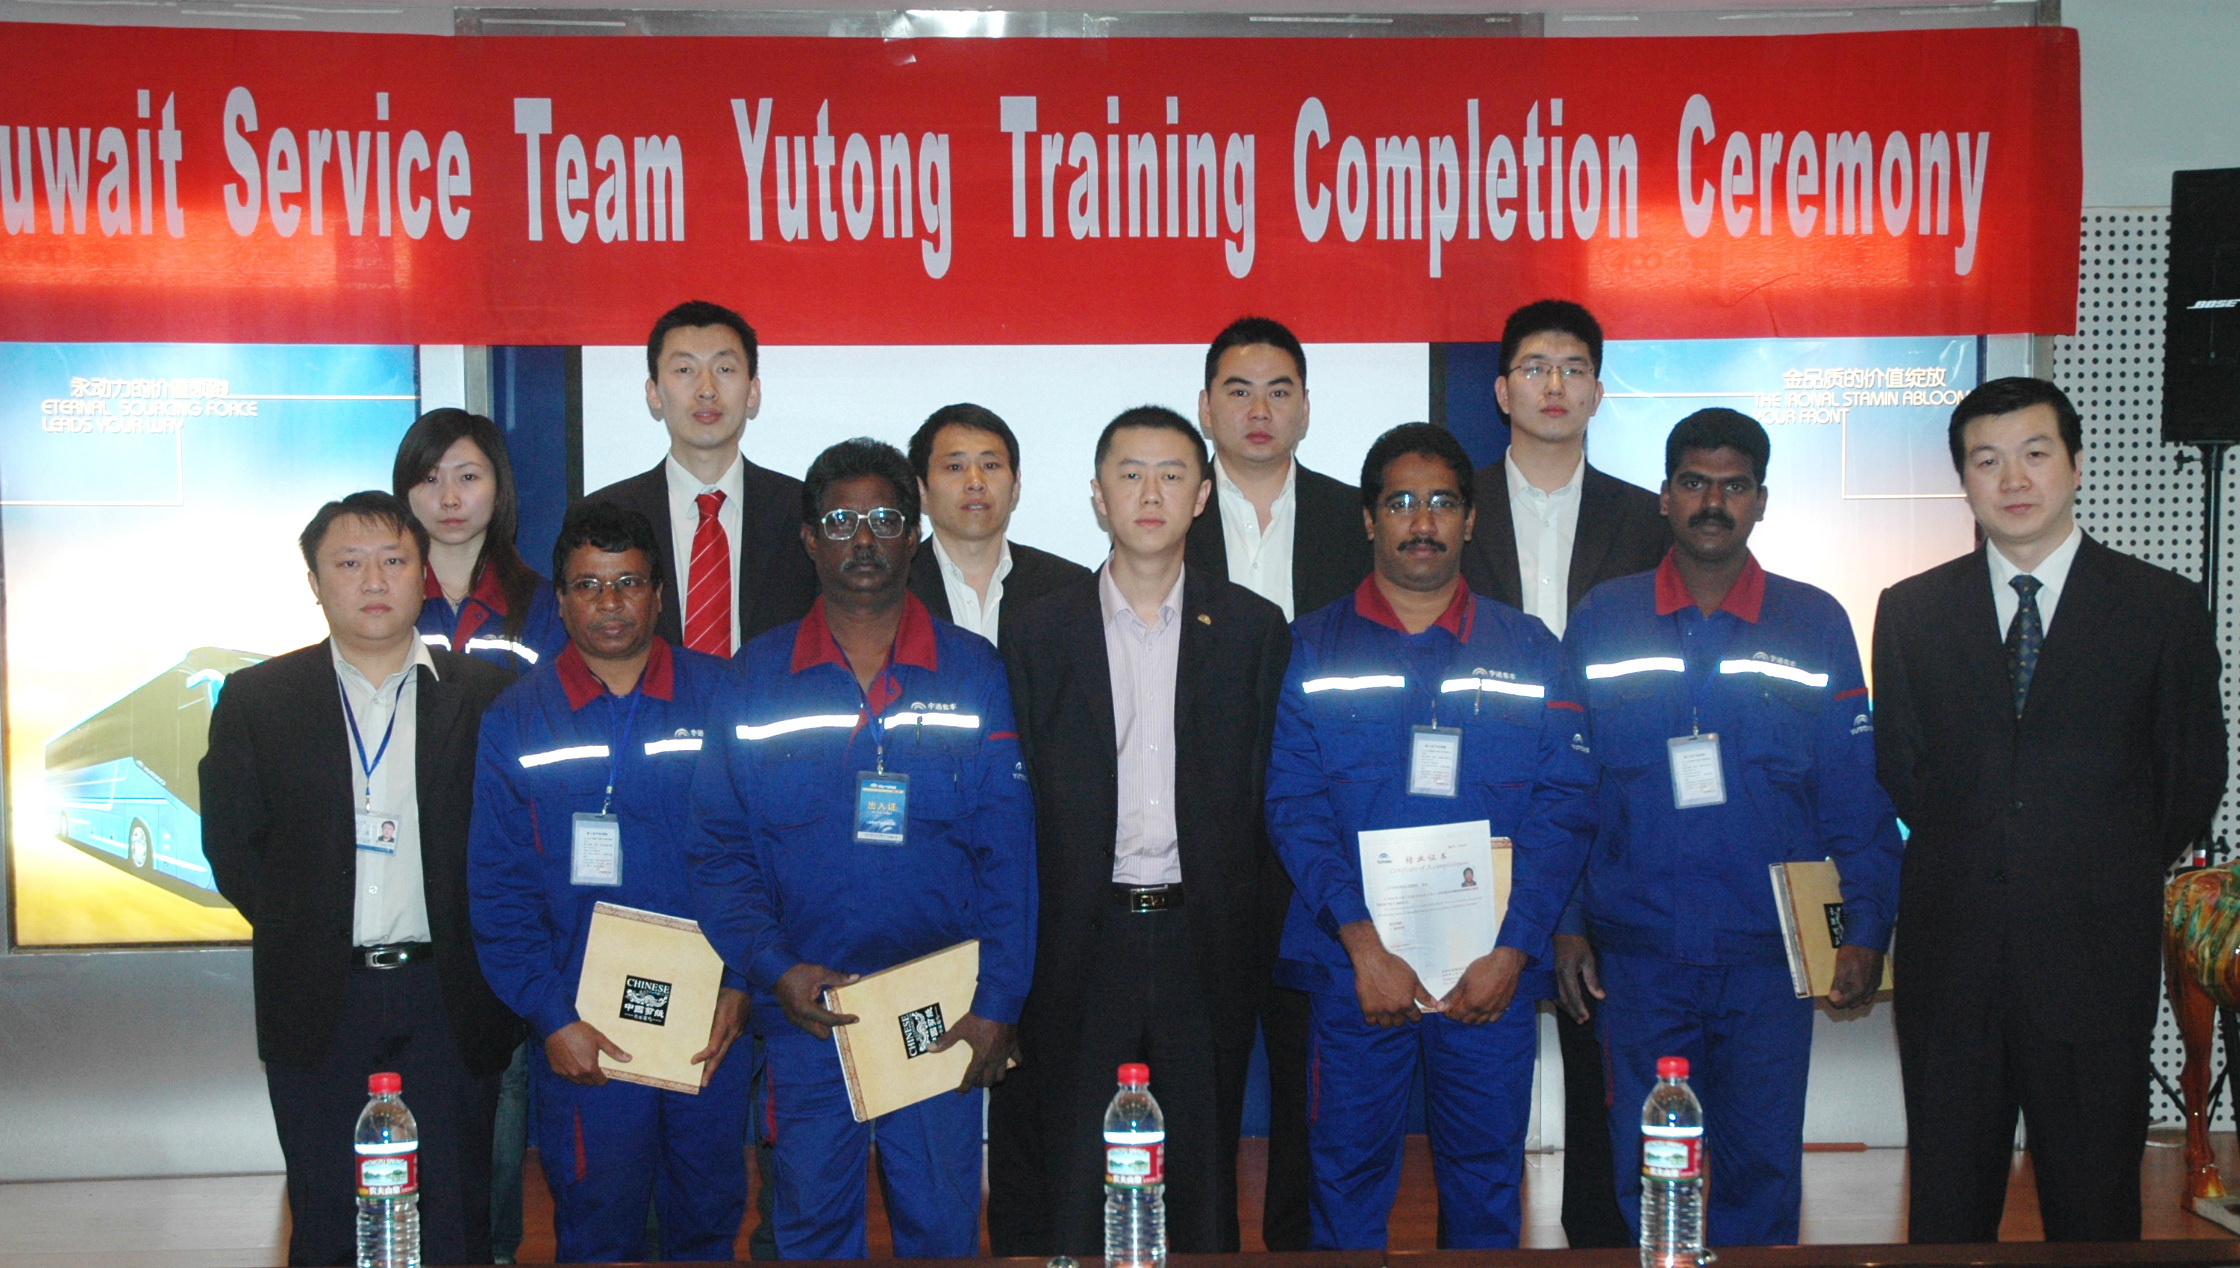 Servicemen from Kuwait Trained in Yutong